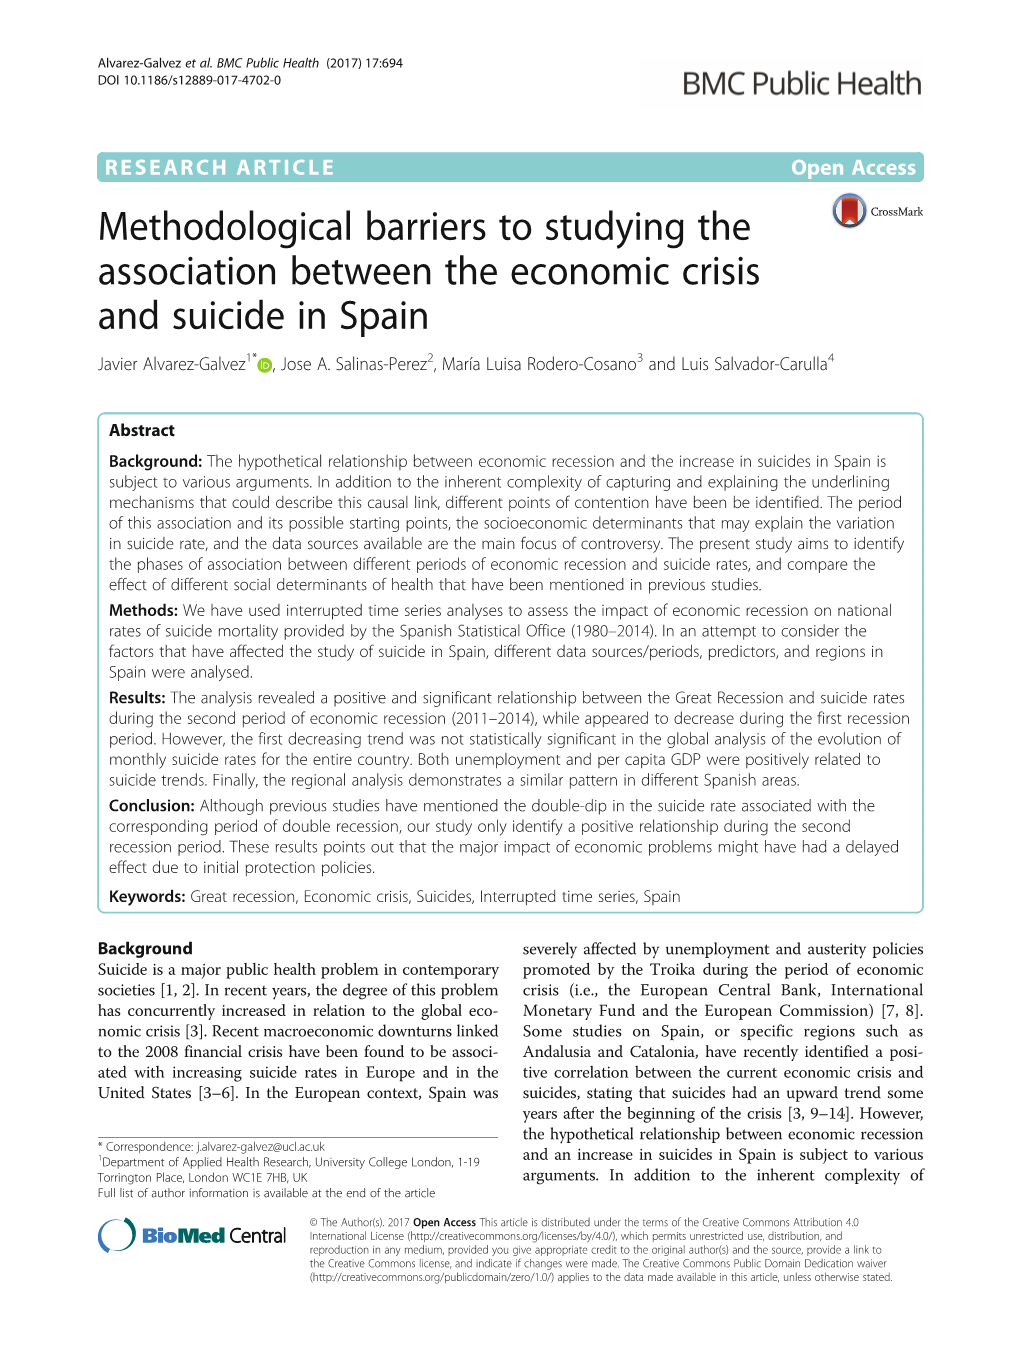 Methodological Barriers to Studying the Association Between the Economic Crisis and Suicide in Spain Javier Alvarez-Galvez1* , Jose A